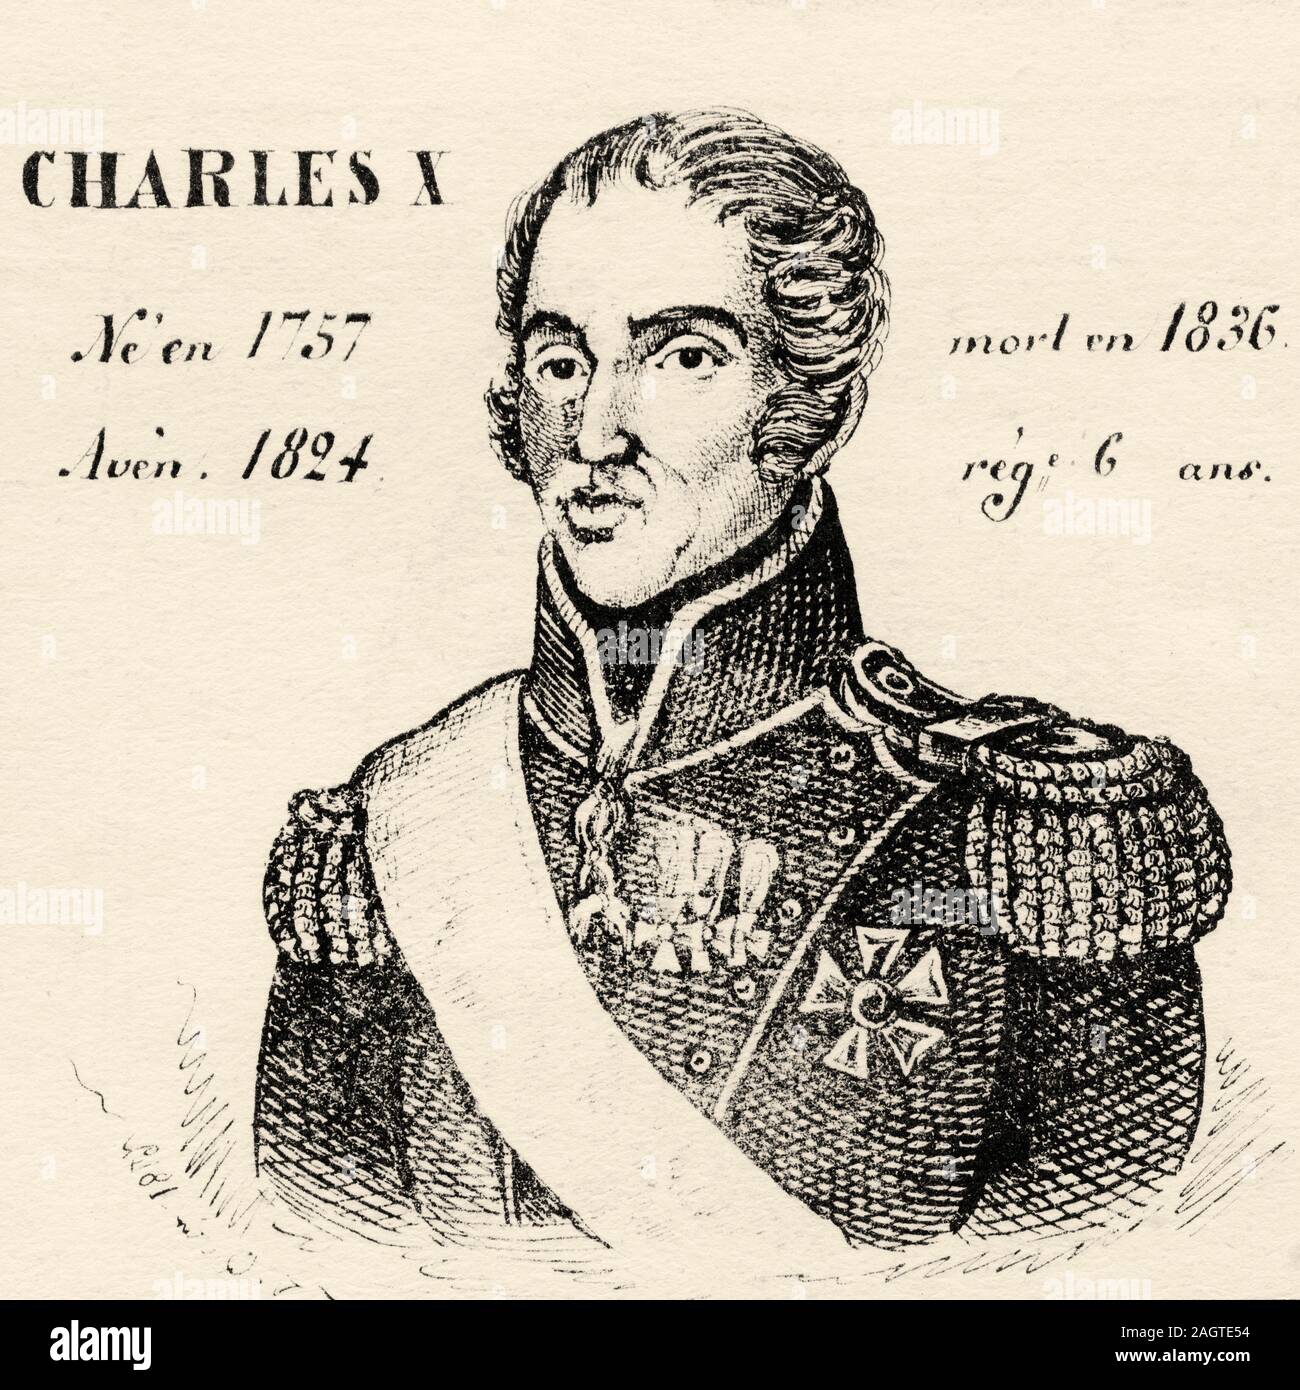 Portrait of Charles X (1757-1836). King of France from 1824 to 1836. House of Bourbon. History of France, from the book Atlas de la France 1842 Stock Photo